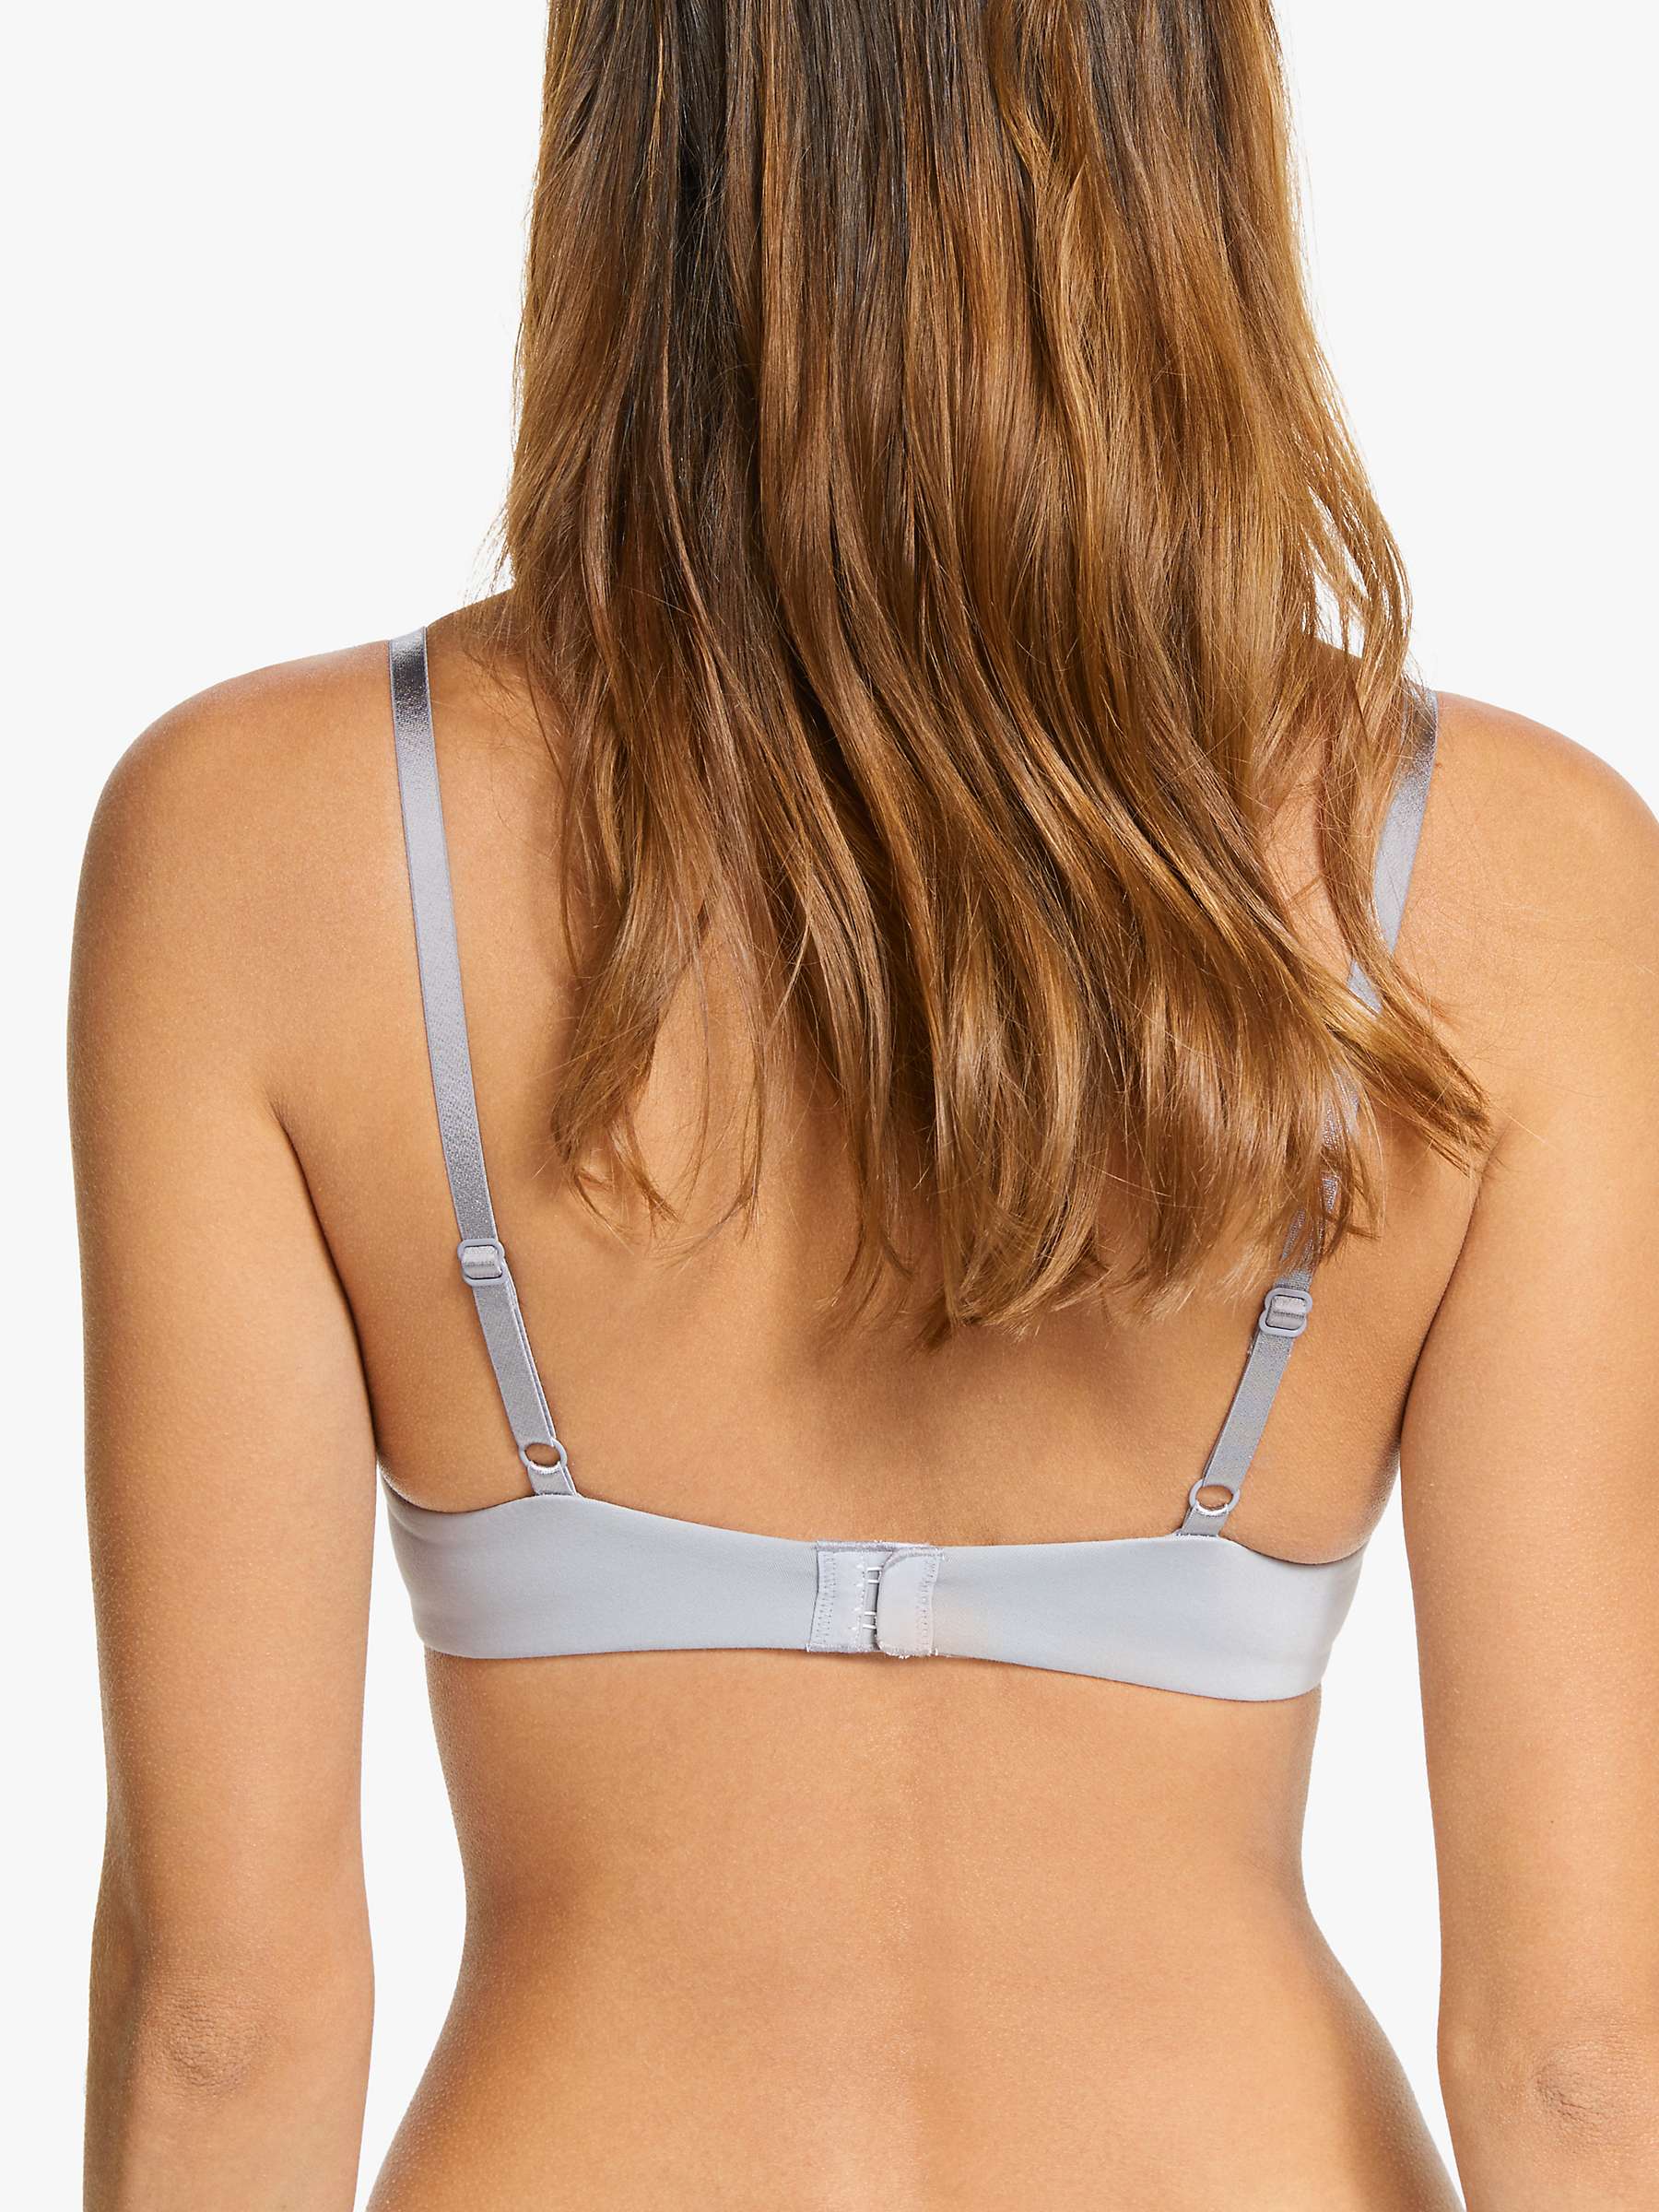 Buy John Lewis ANYDAY Willow Non-Wired Bra, Grey Online at johnlewis.com